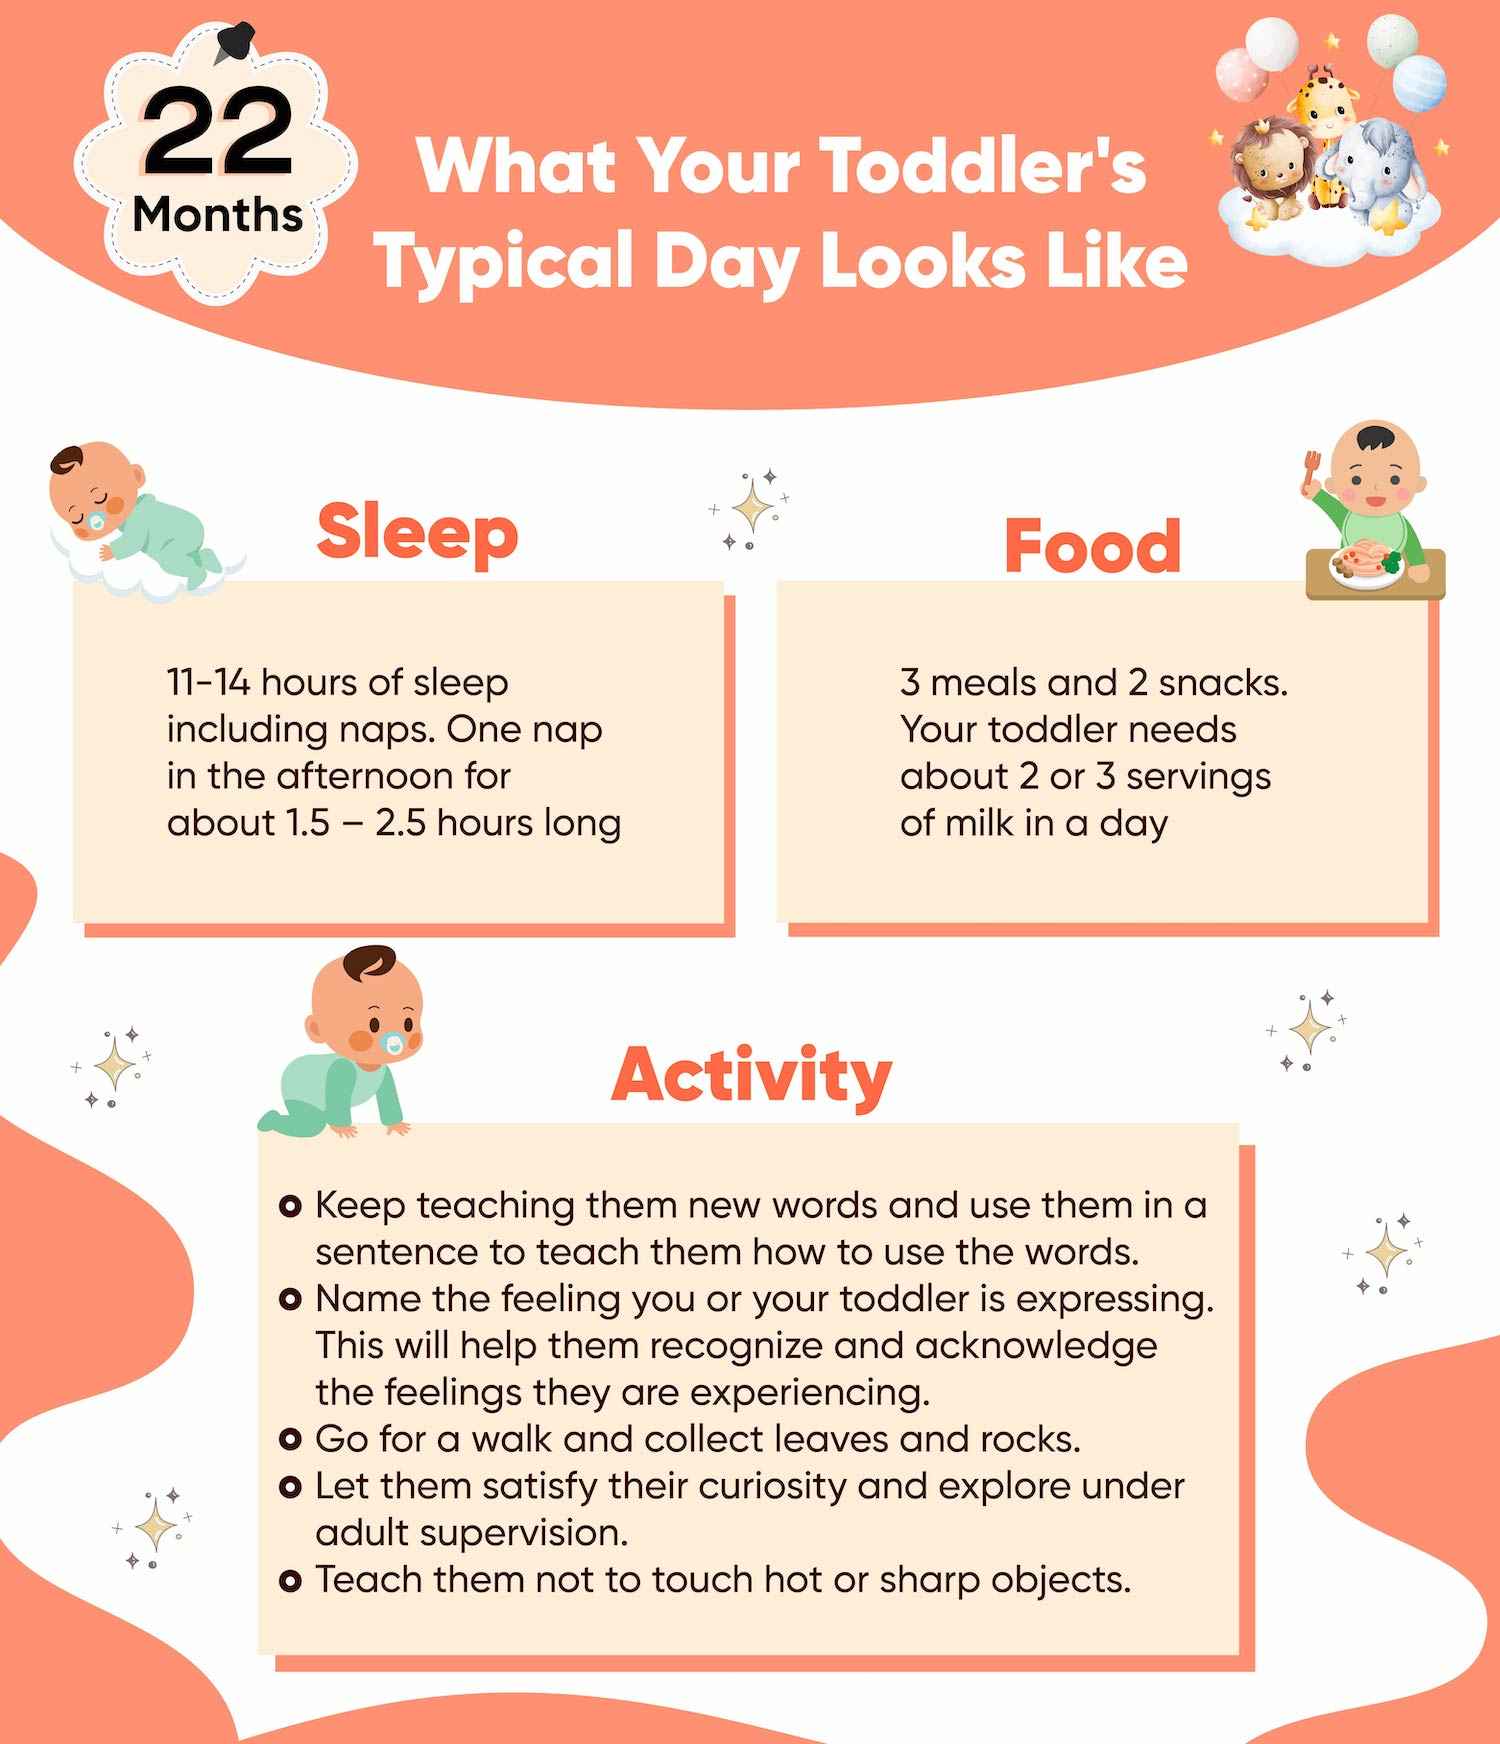 What Your Toddler’s Typical Day Looks Like?